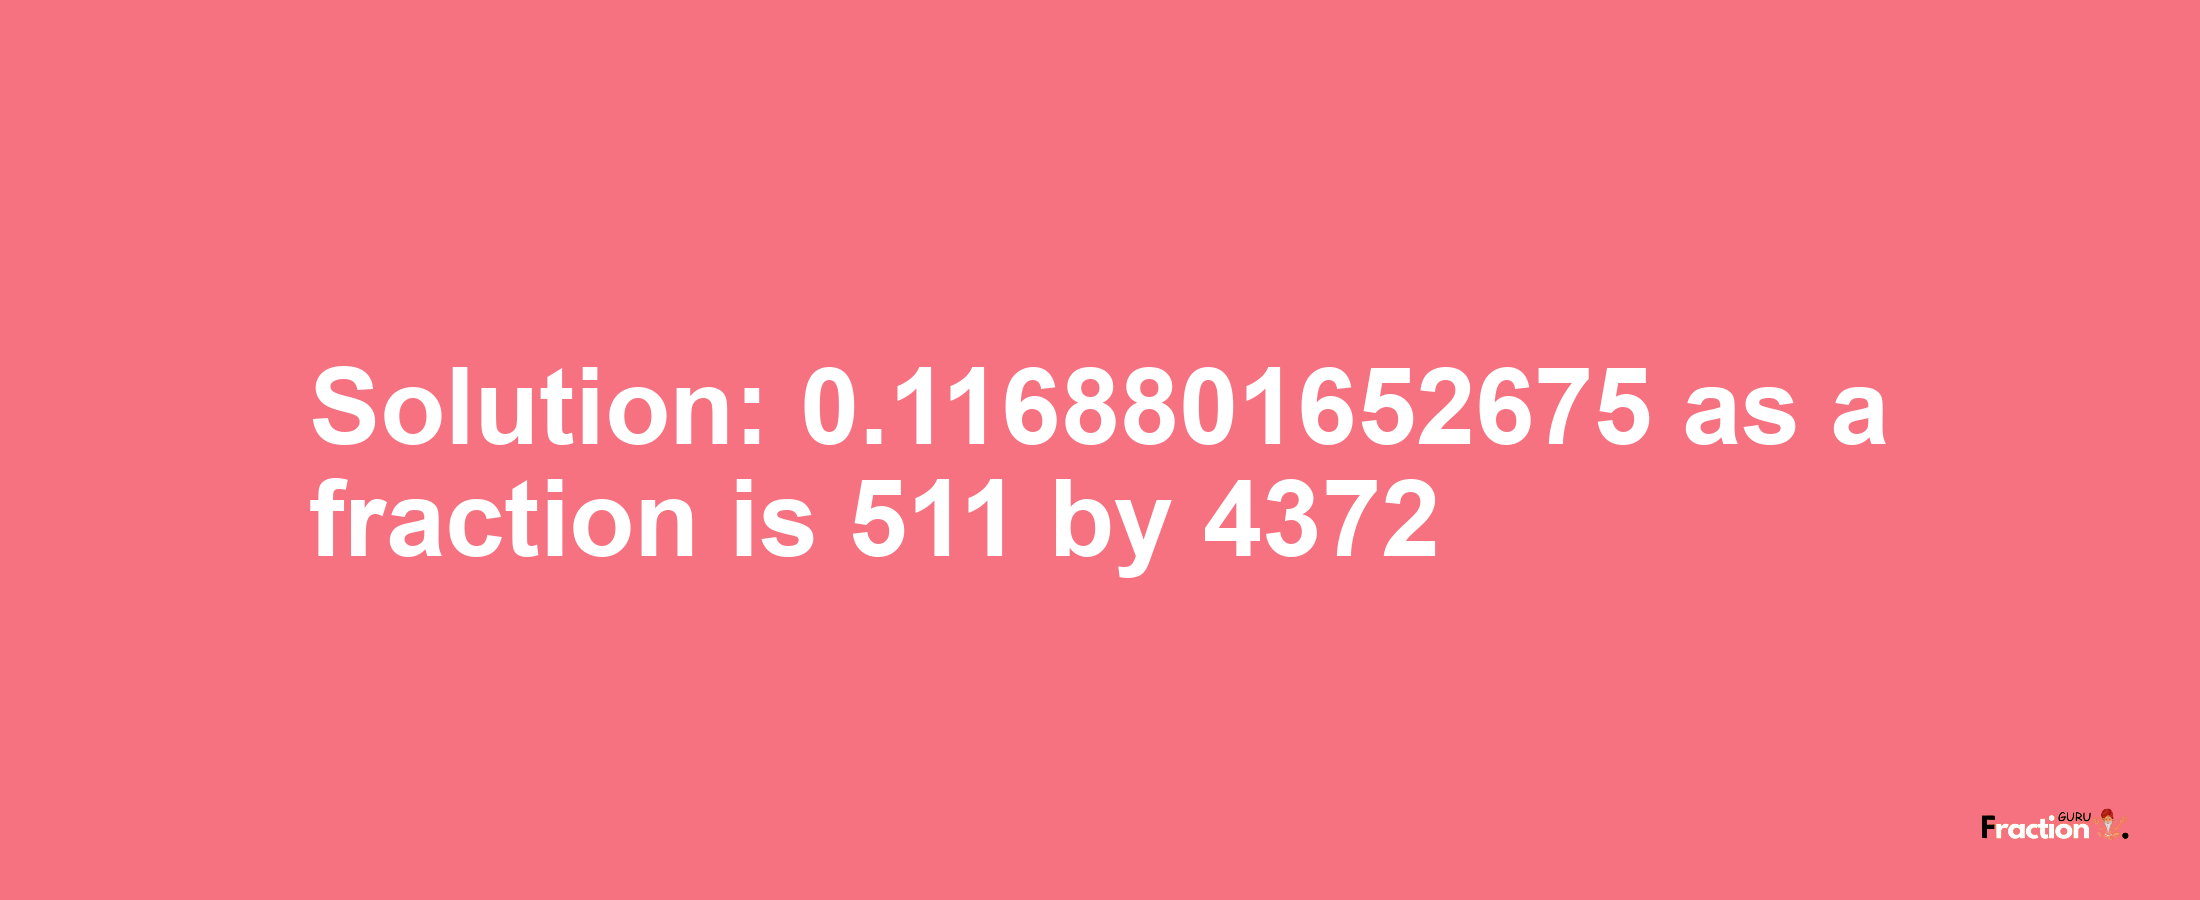 Solution:0.1168801652675 as a fraction is 511/4372